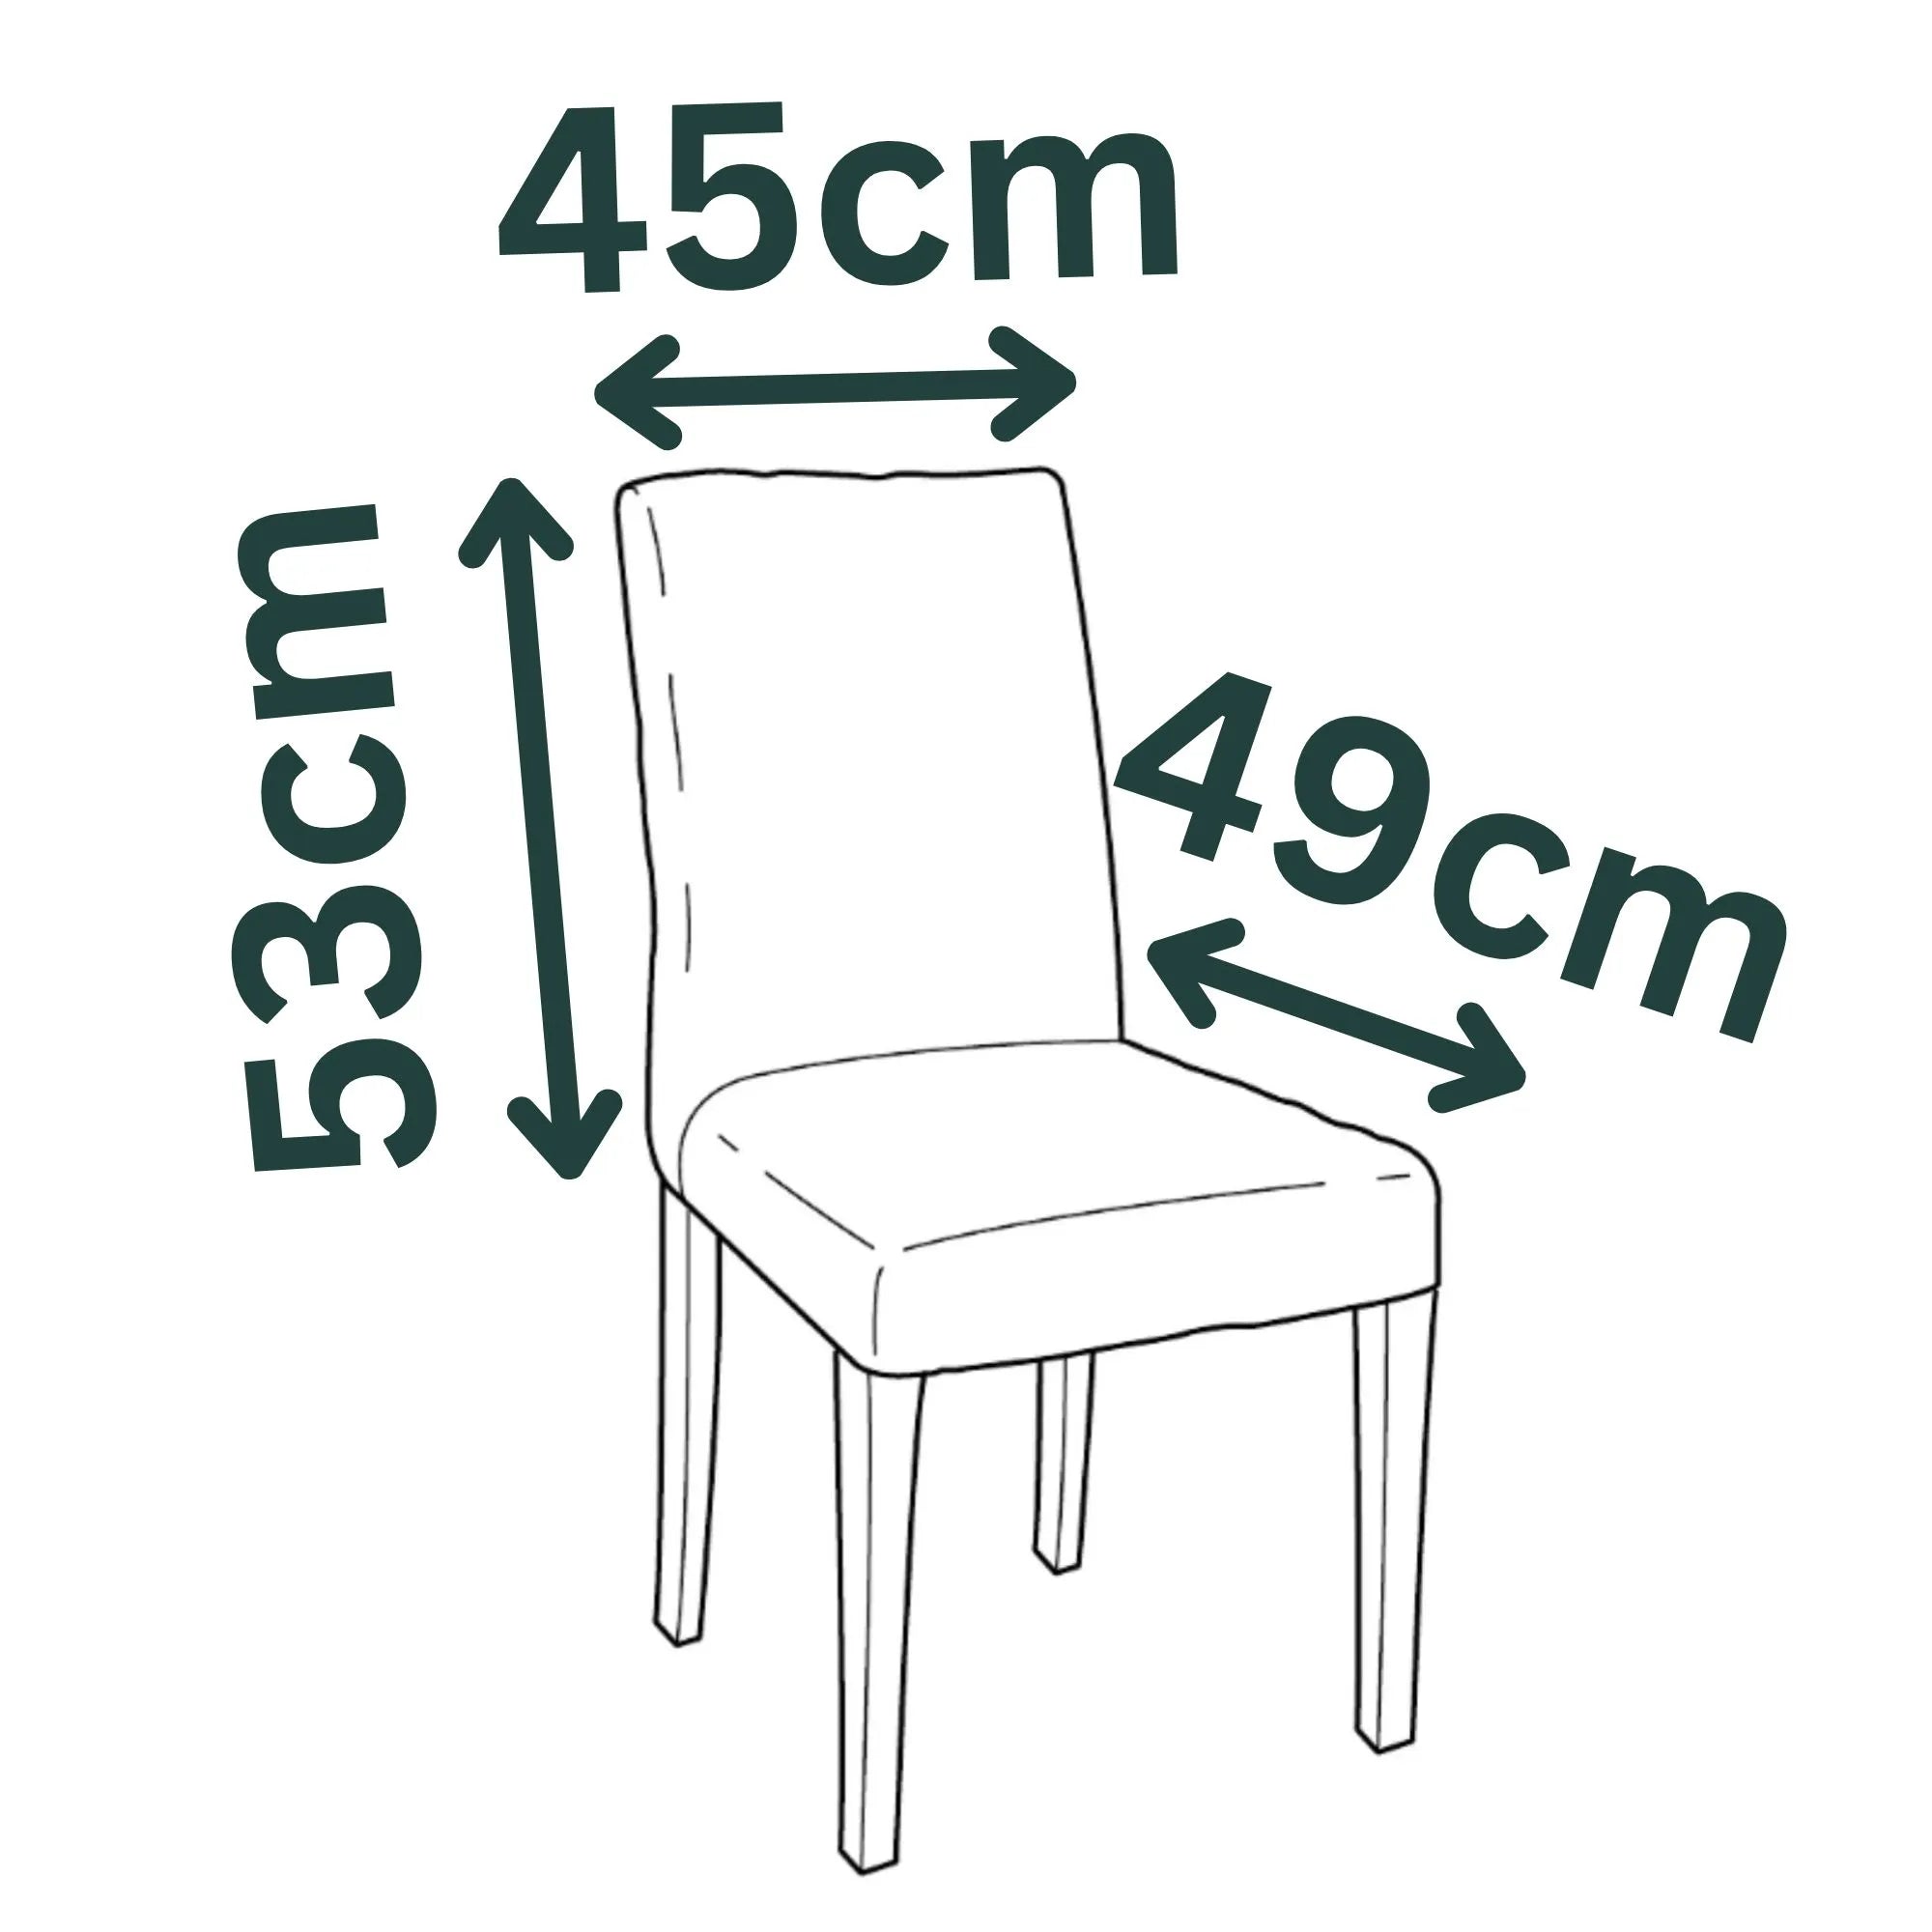 HENRIKSDAL IKEA Chair Cover - Larger Size Model